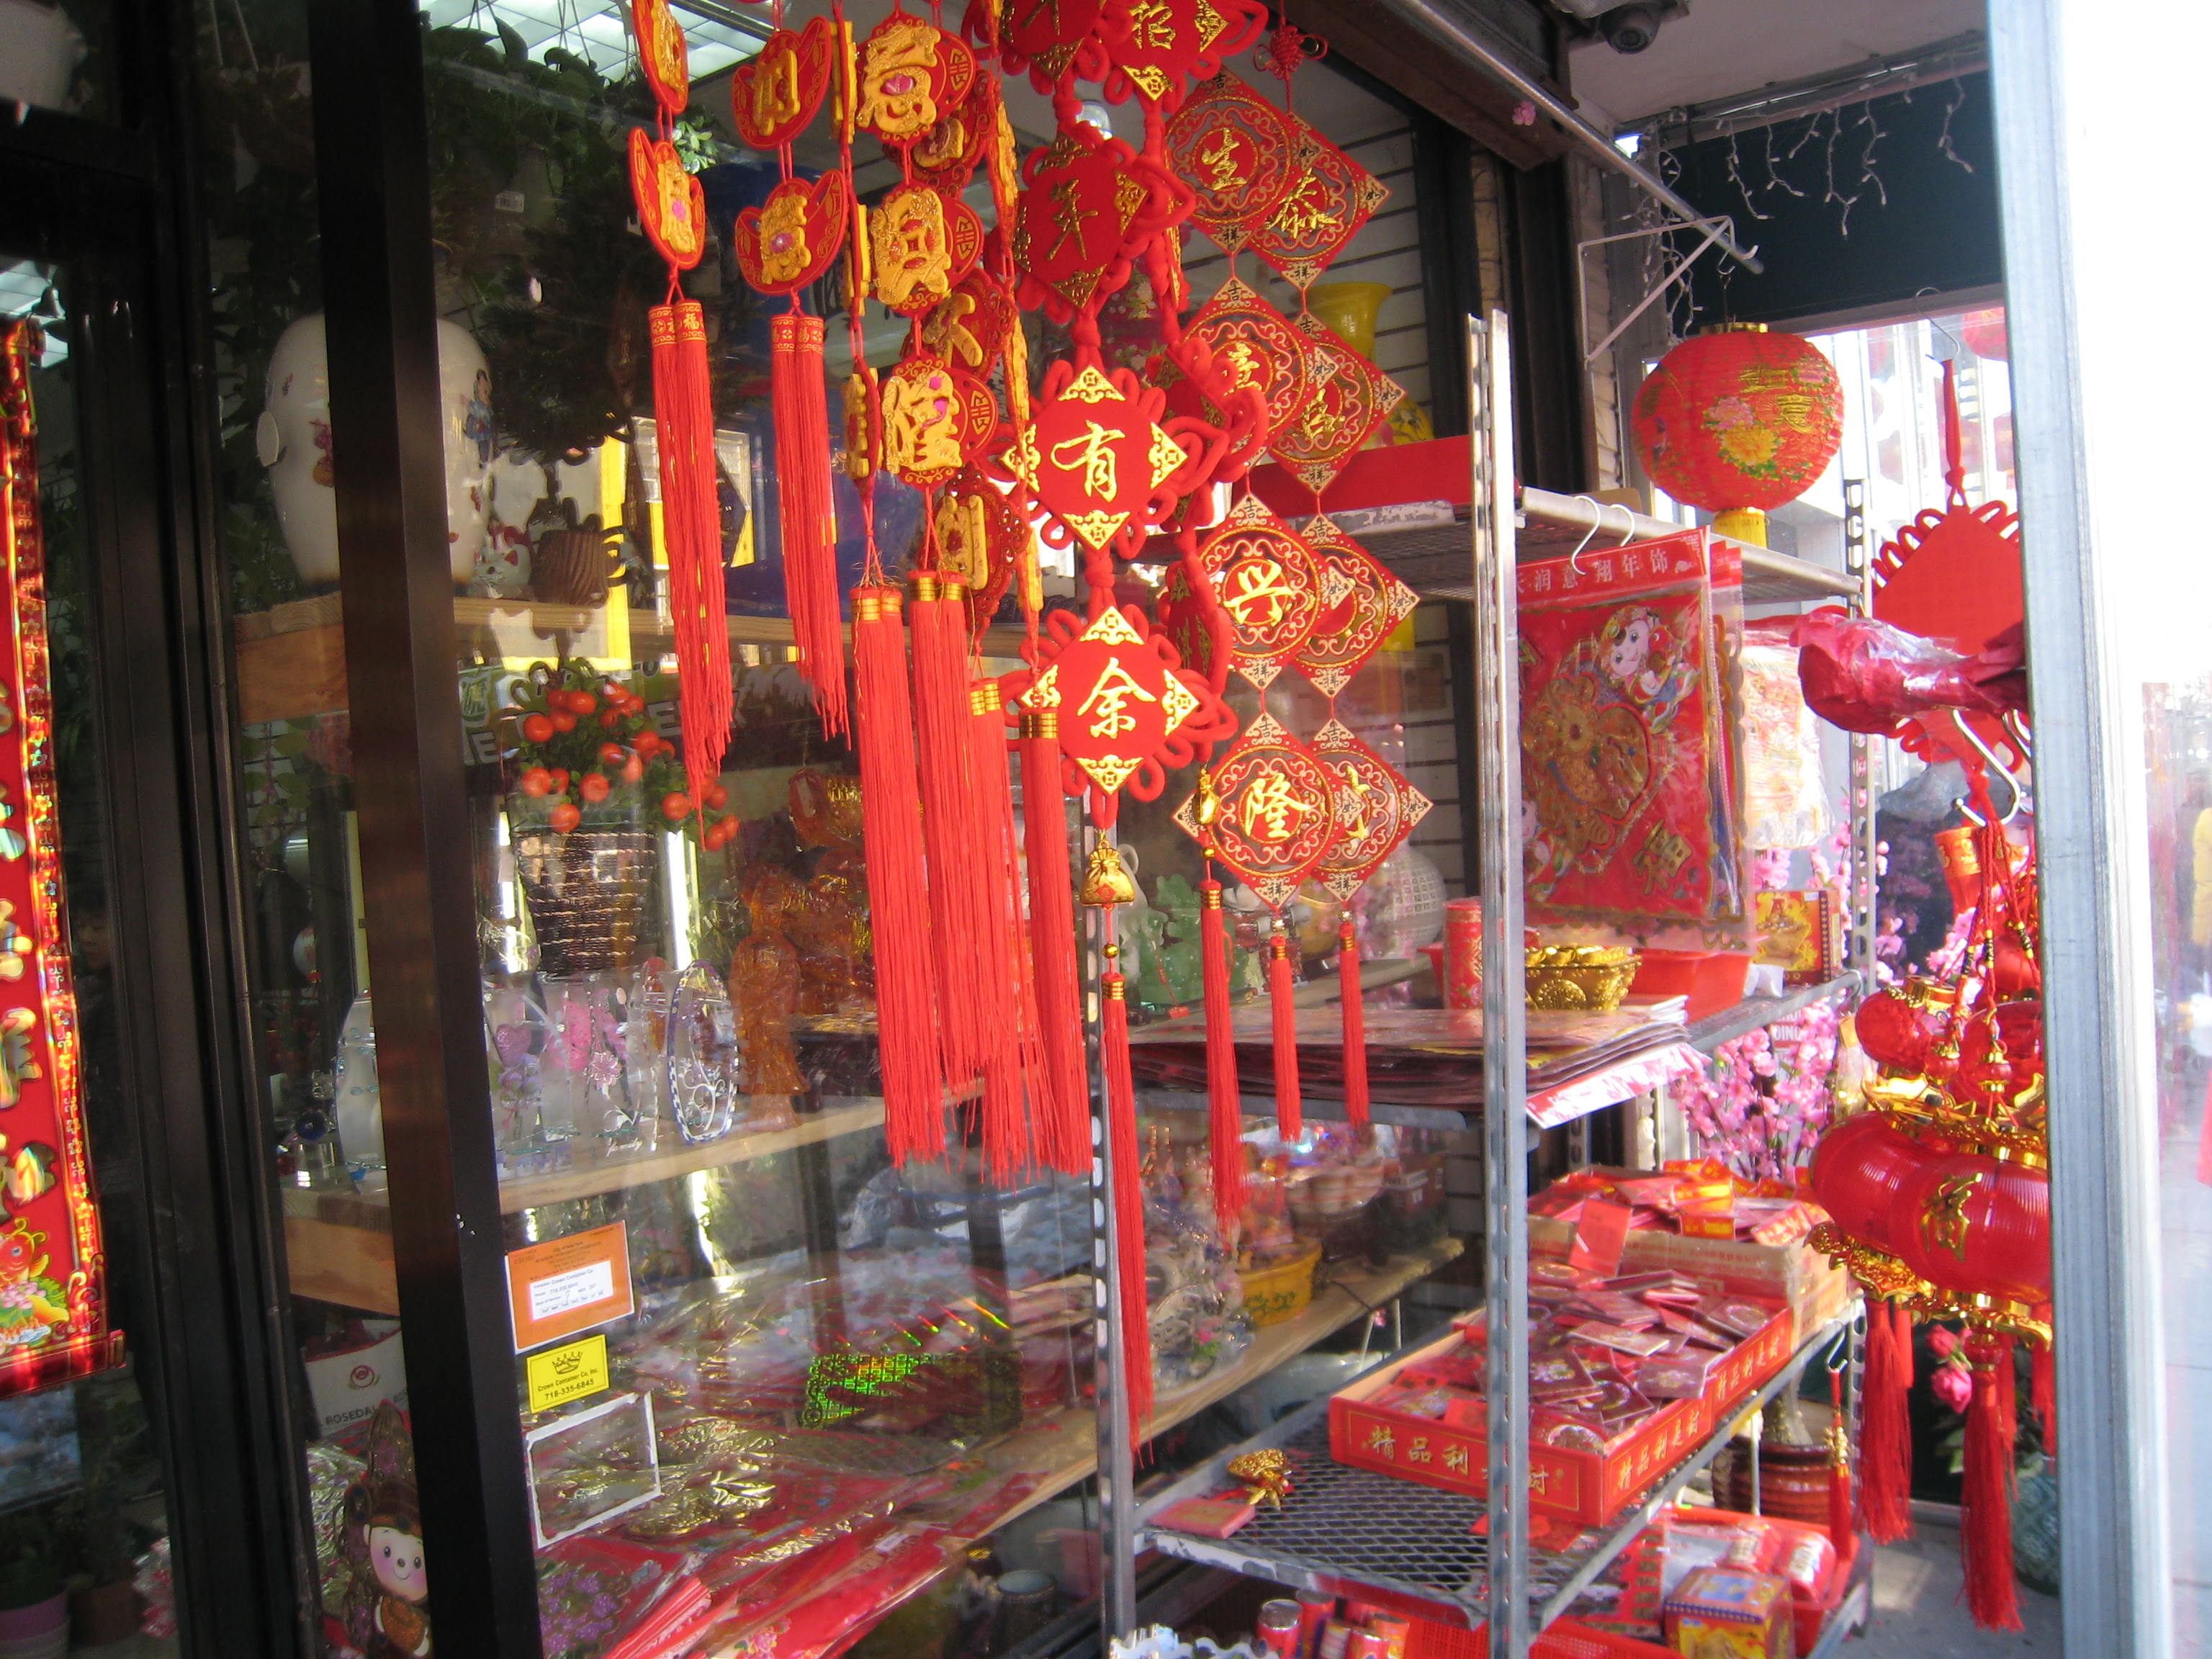 Festive red hangings and paper cuttings are a staple of Lunar New Year.  